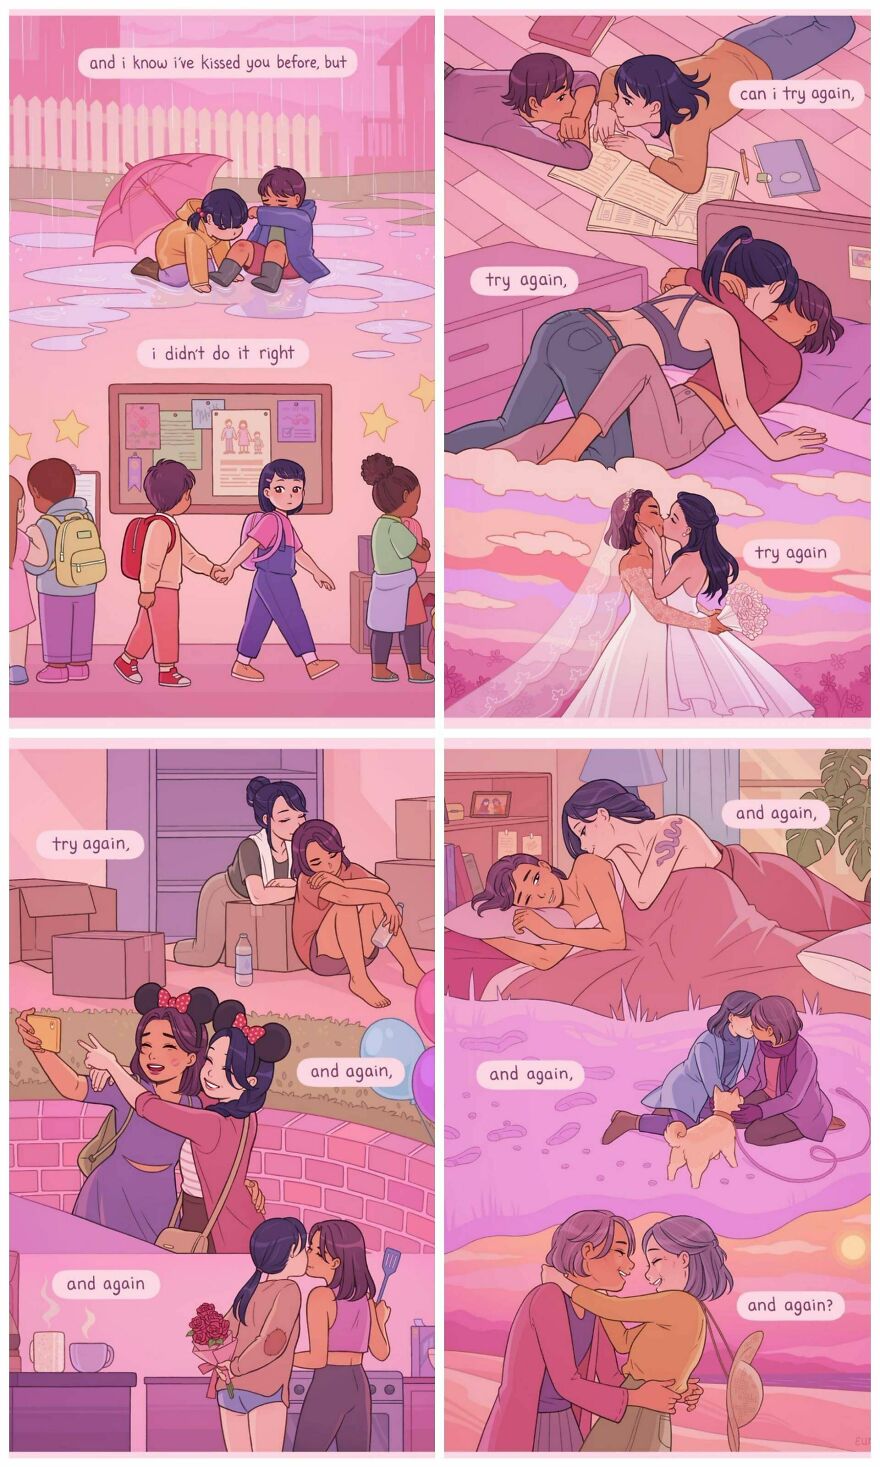 32 Of My Favorite Gay Comics, Tweets, And Pictures.